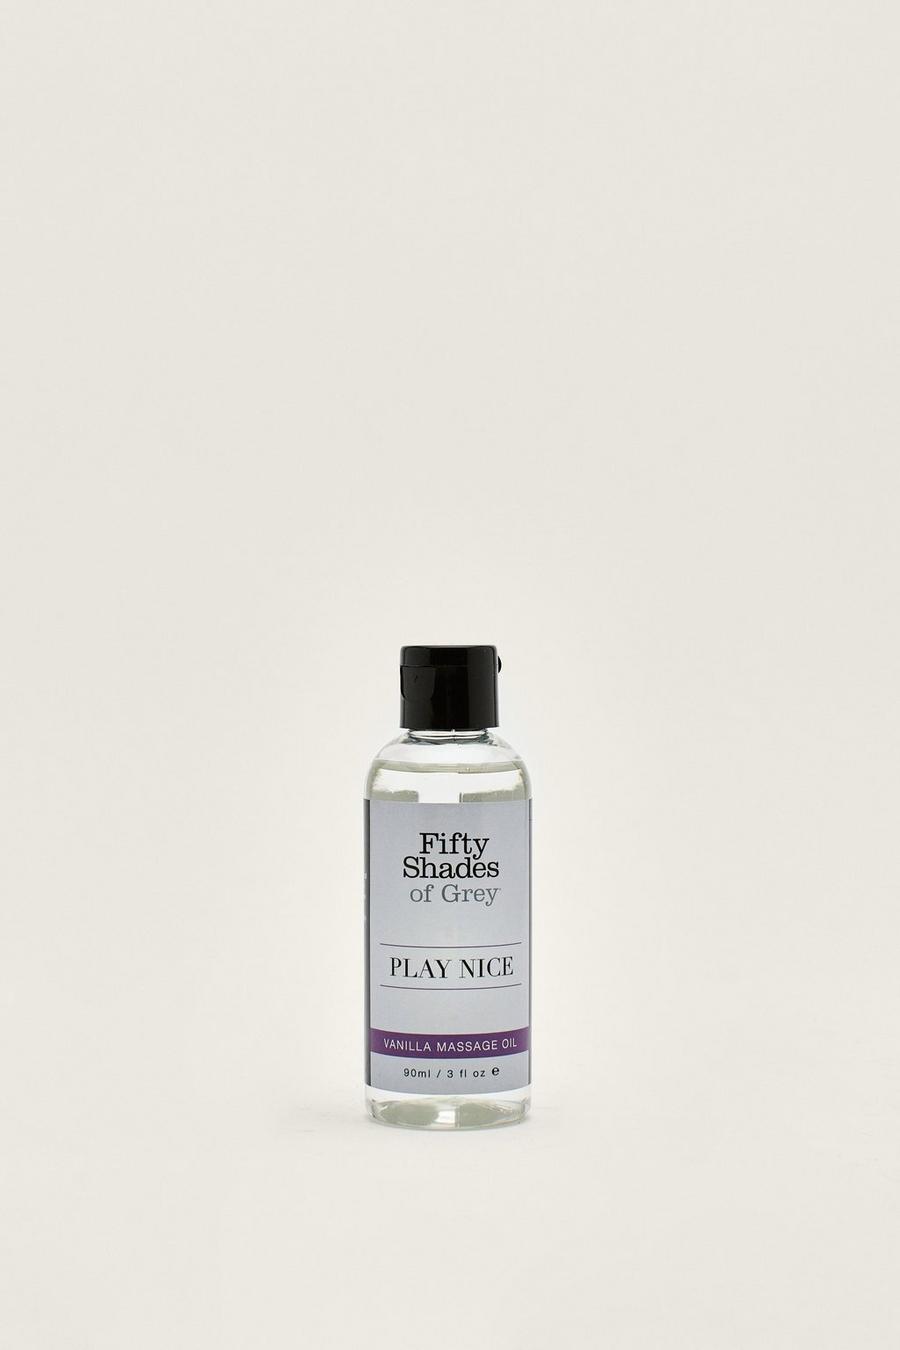 Fifty Shades Of Grey Play Nice Massage Oil